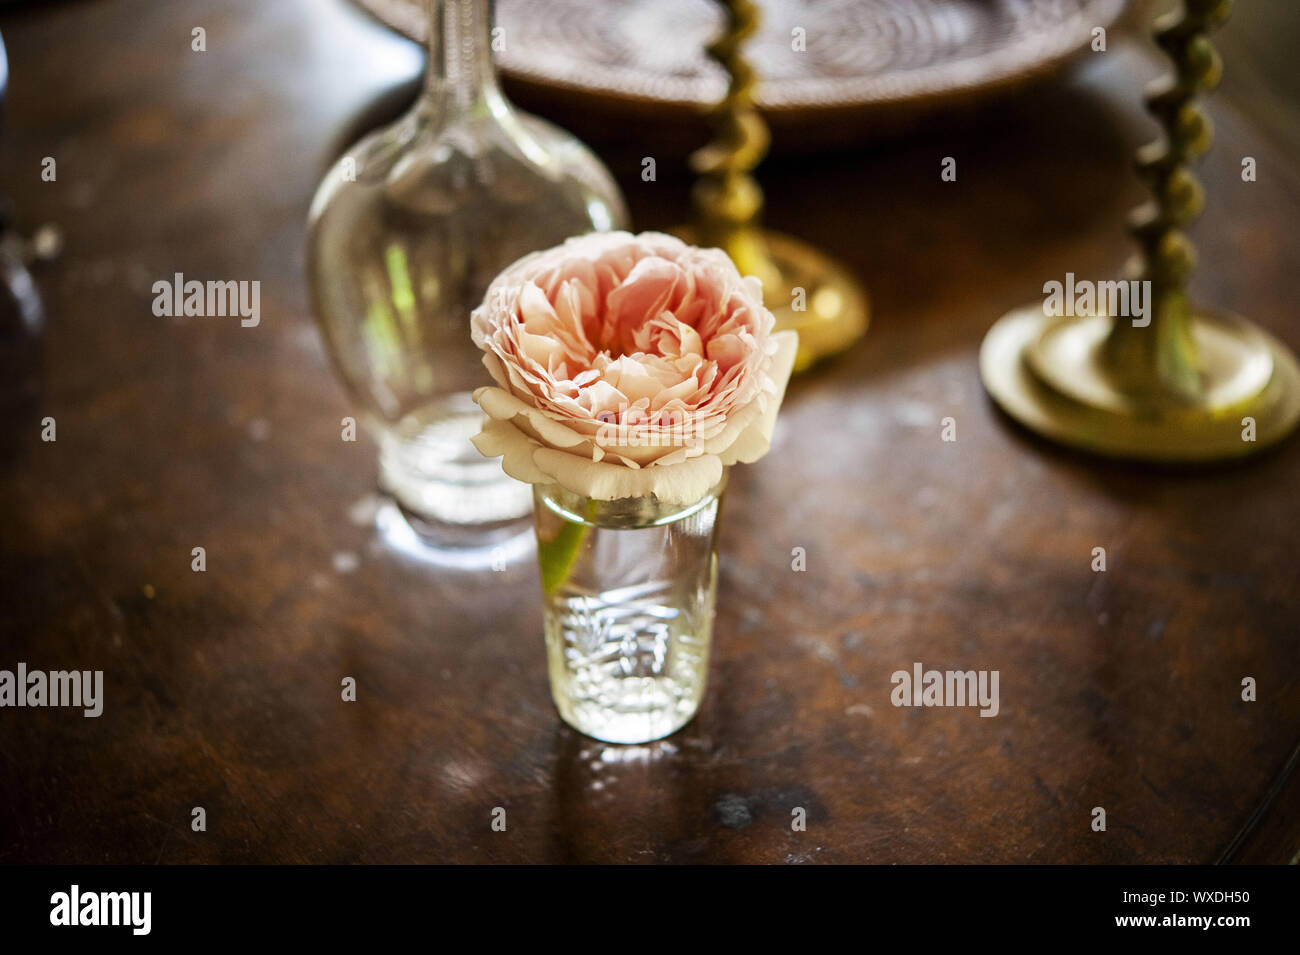 pink rose flower cutting in crystal vase on table with candle stick and vase Stock Photo